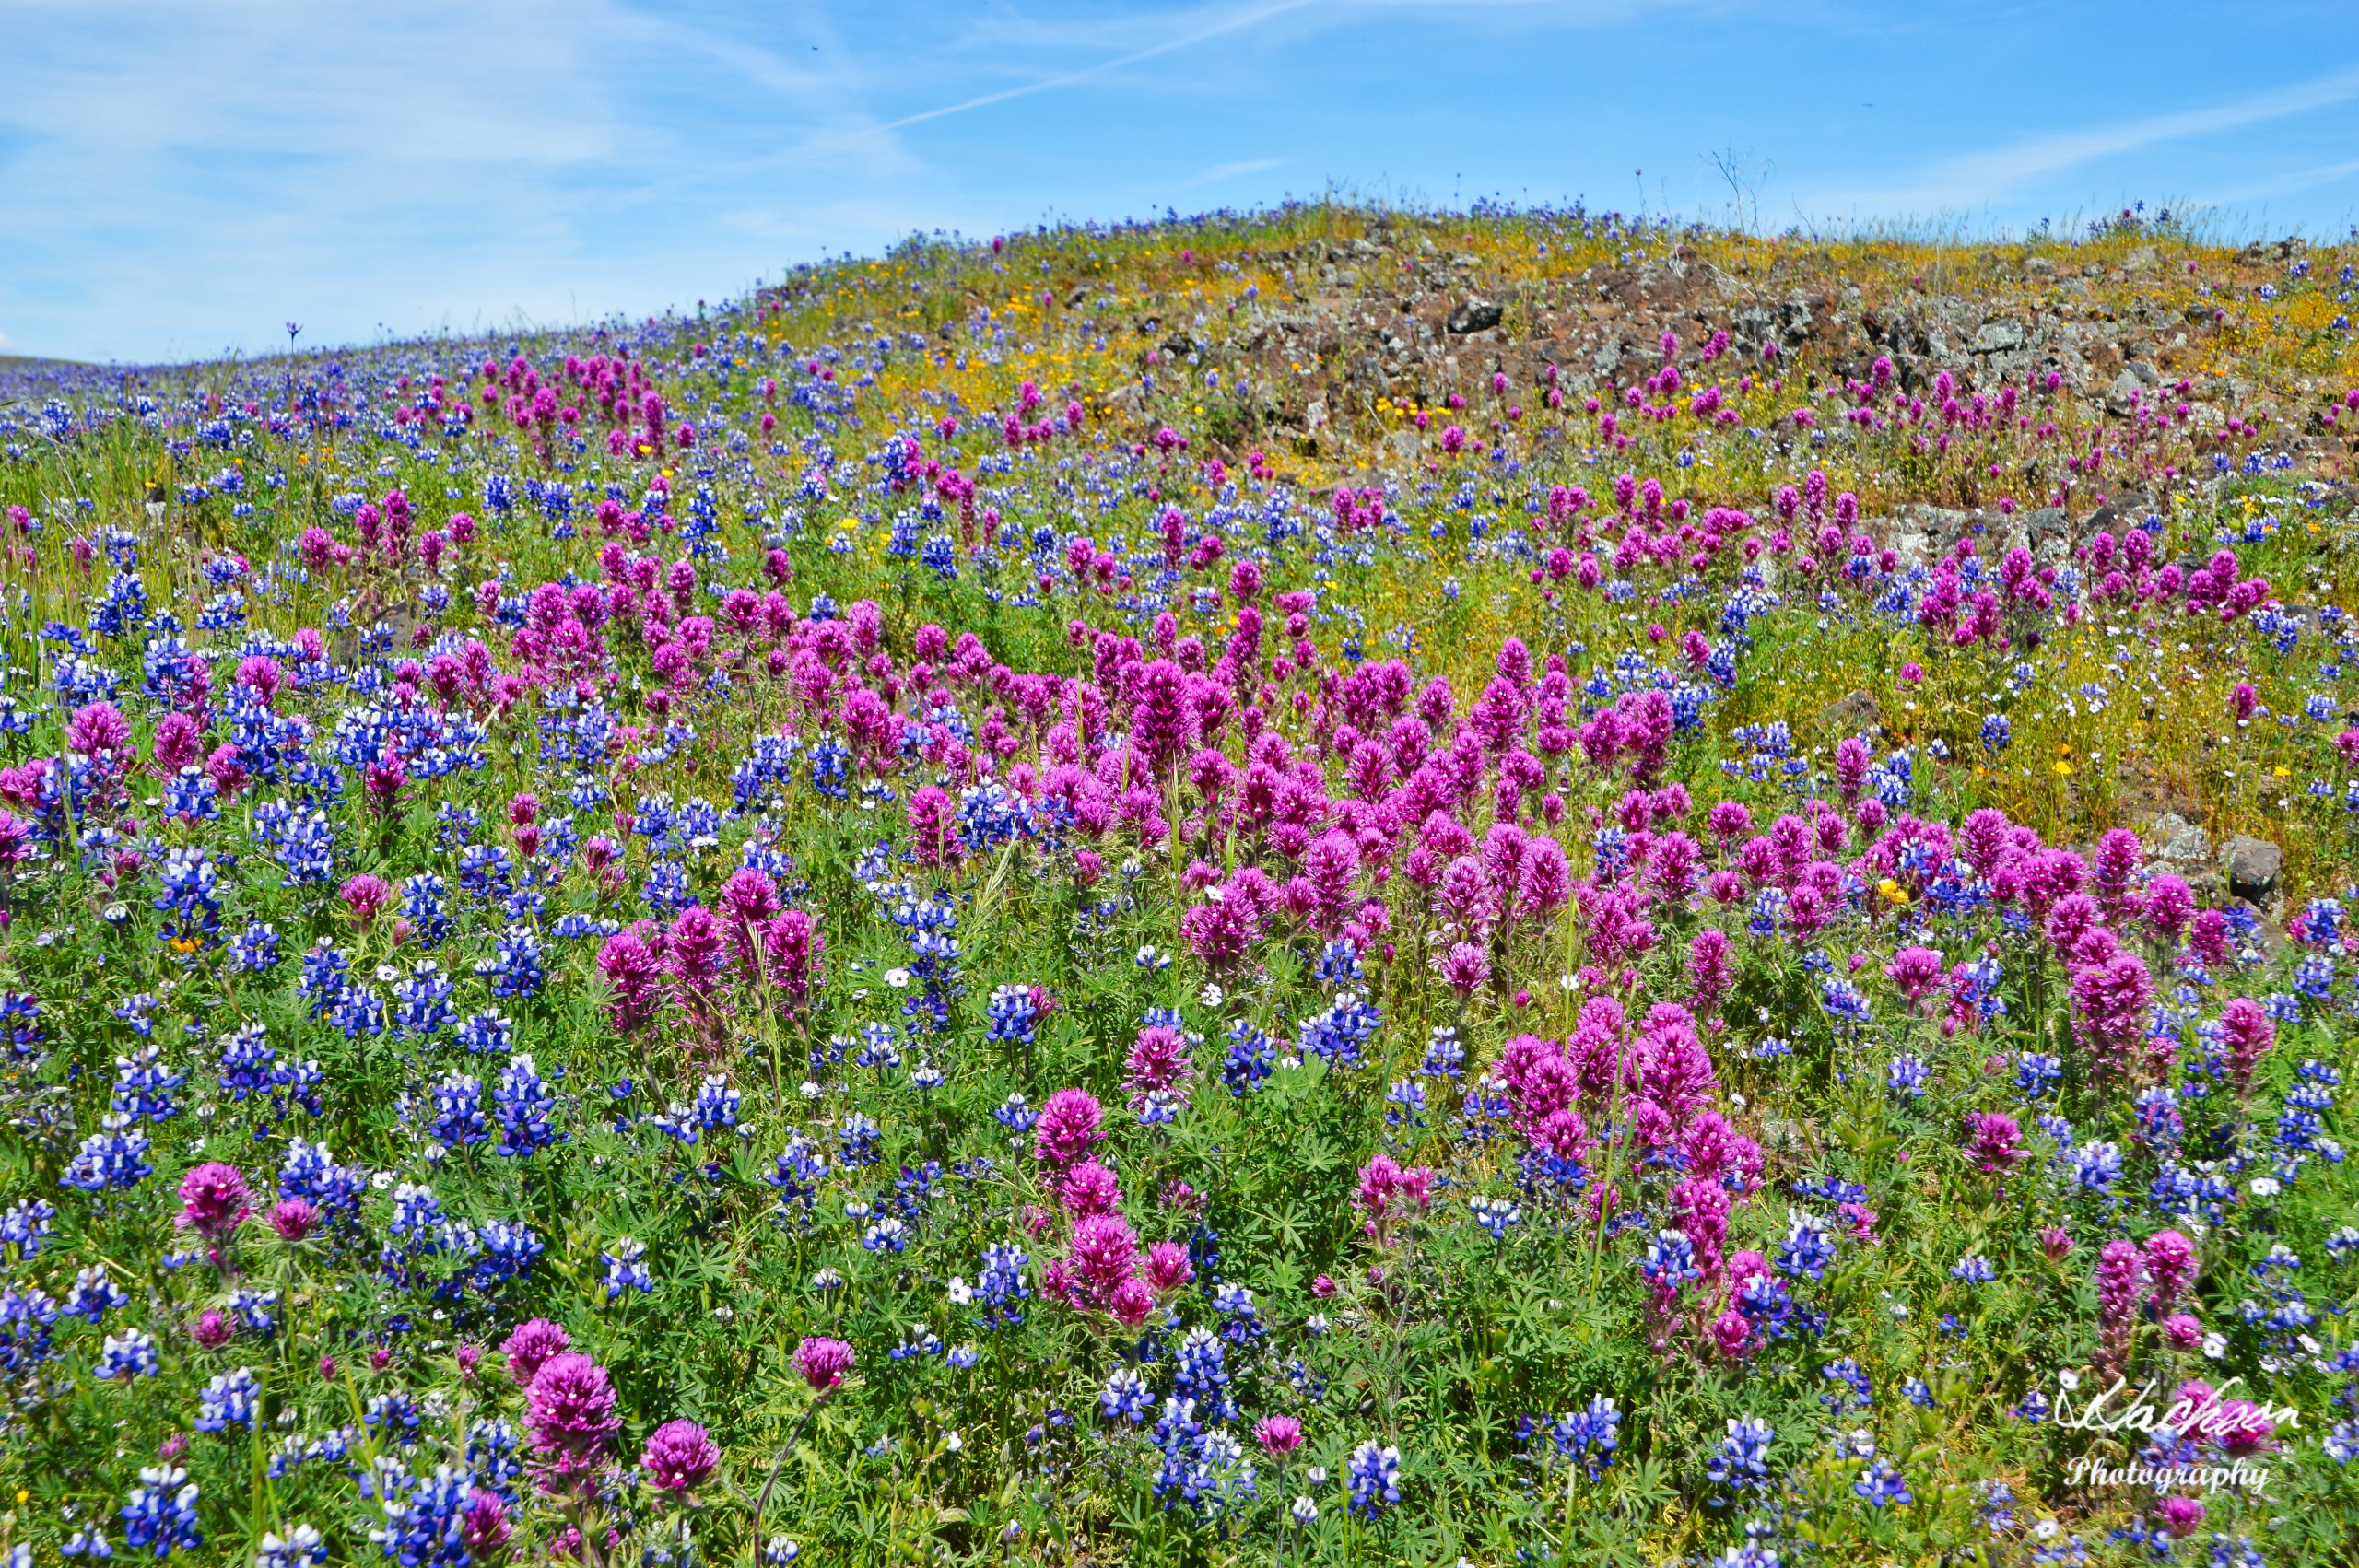 A rainbow of colorful wildflowers